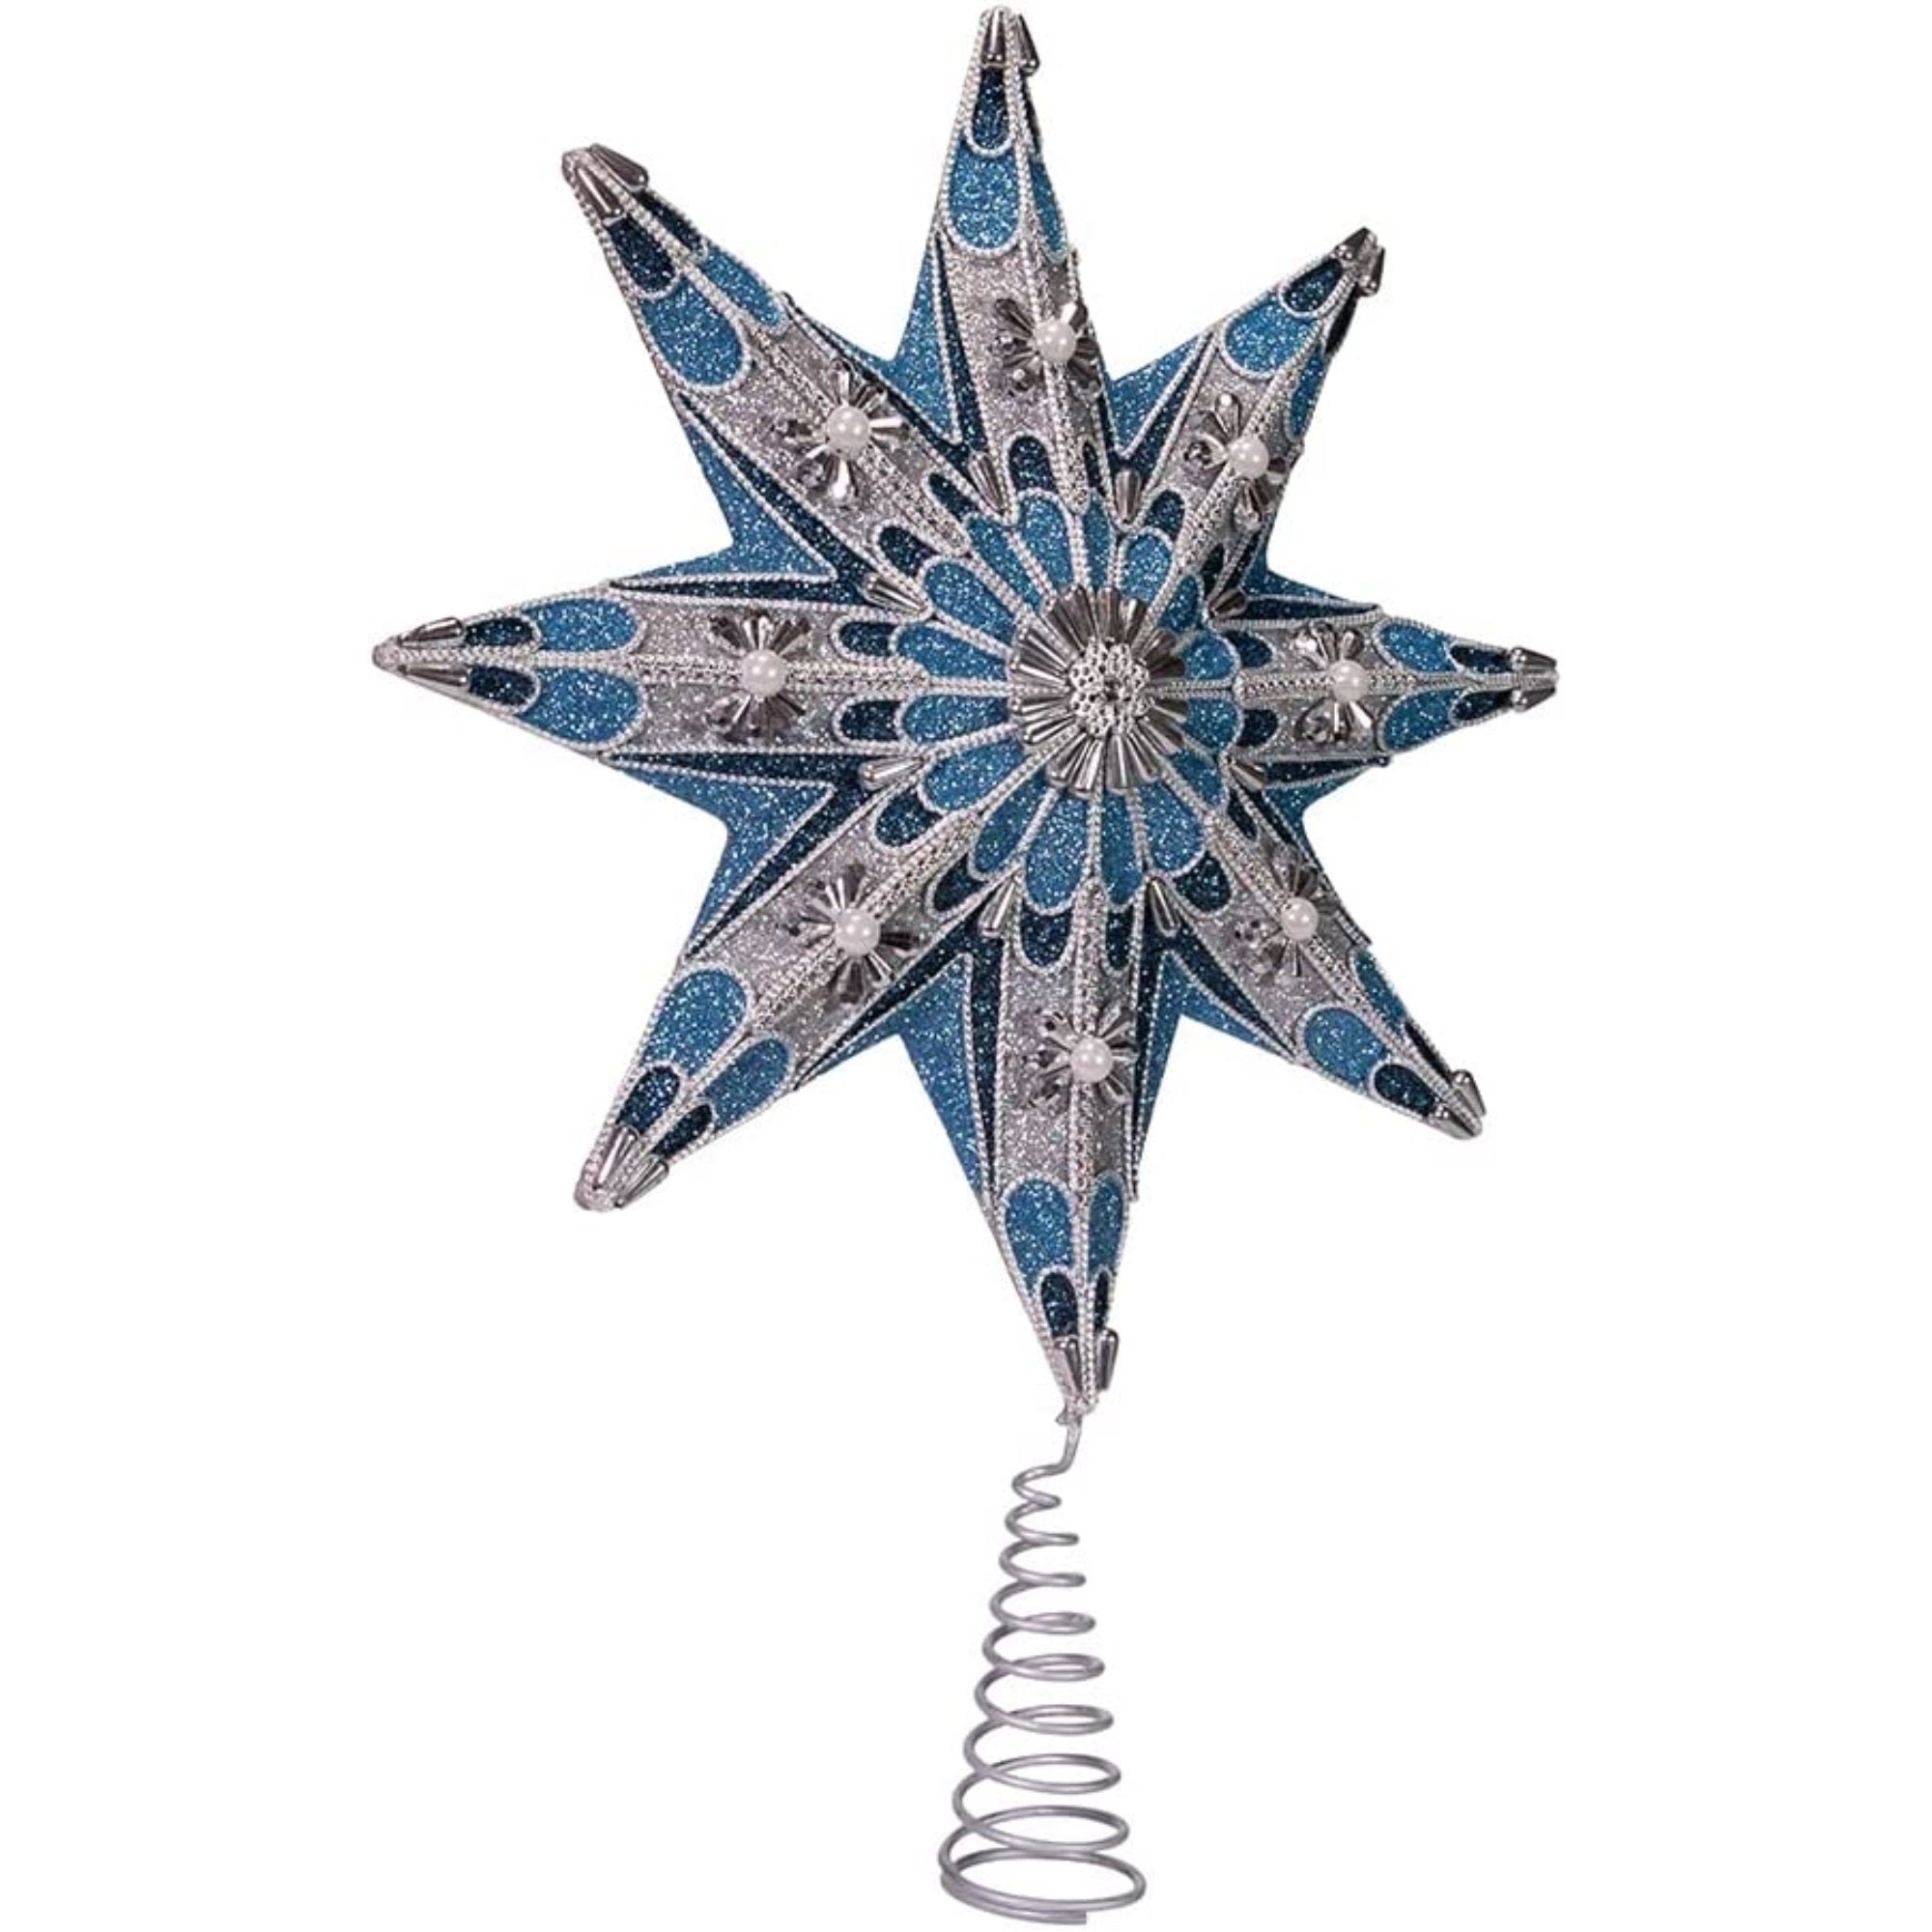 Kurt Adler 8-Point Blue and Silver Star Treetop Tree Topper, 16"